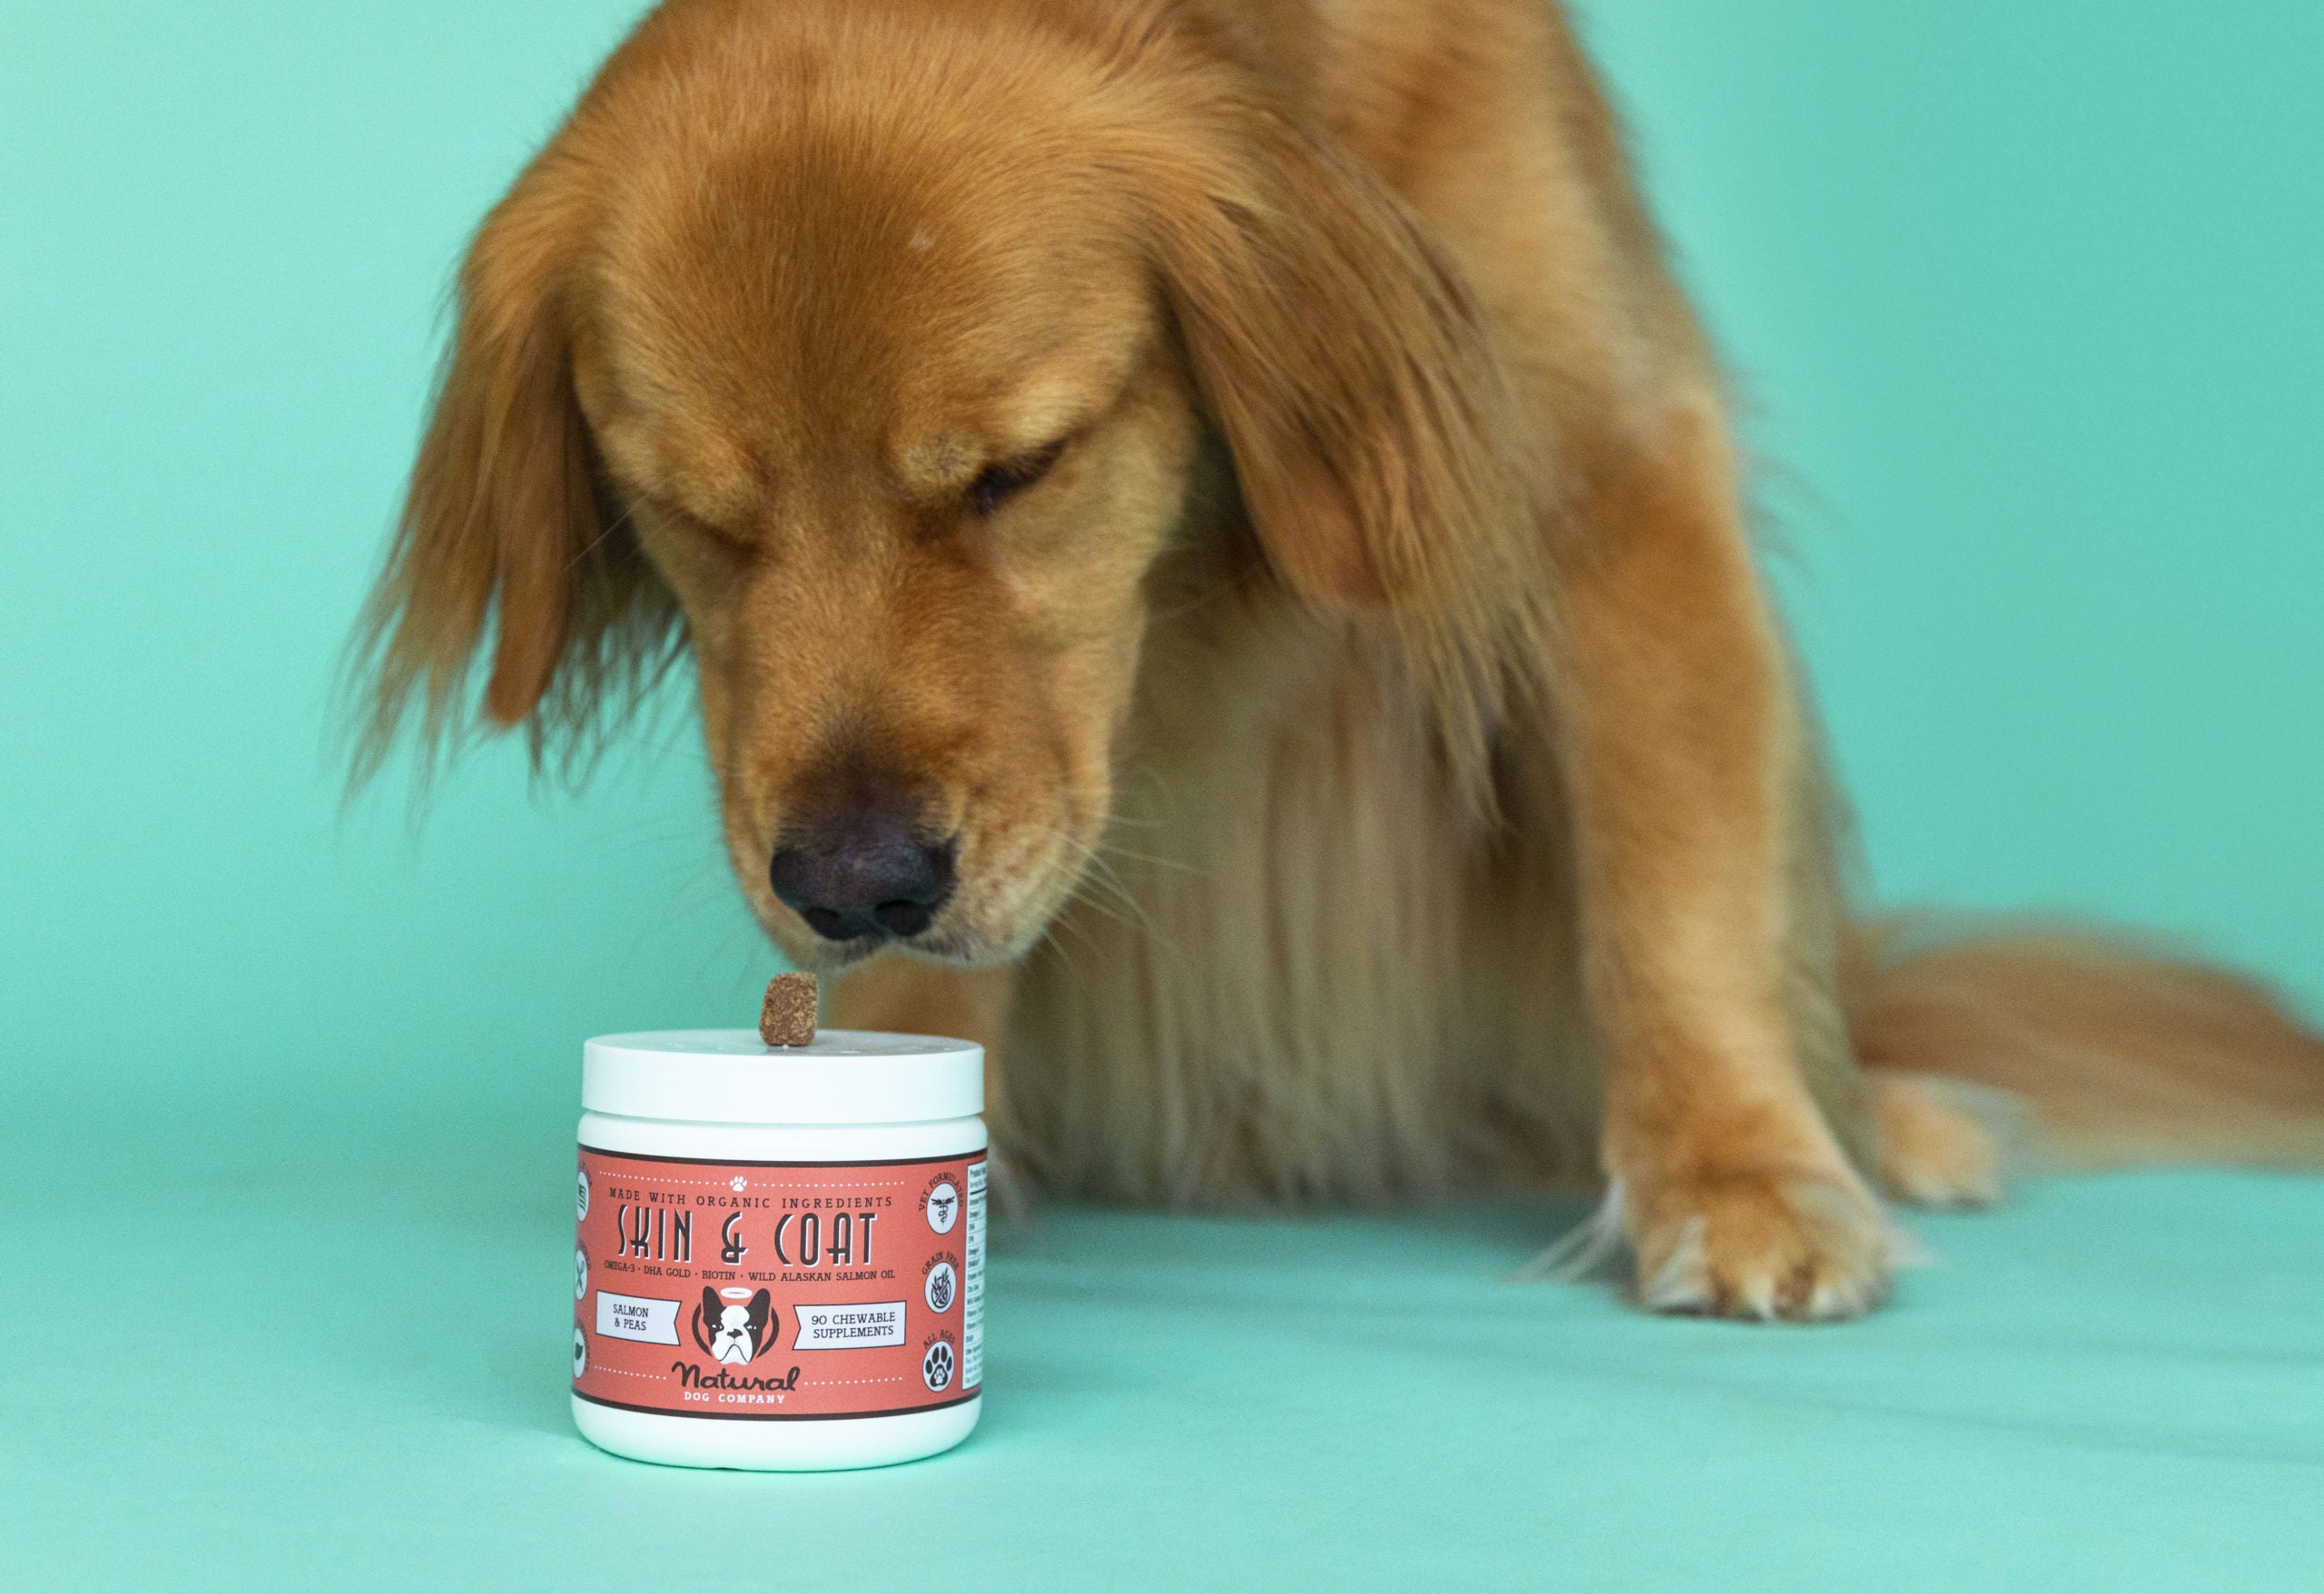 Golden retriever sniffing supplement chew with great interest